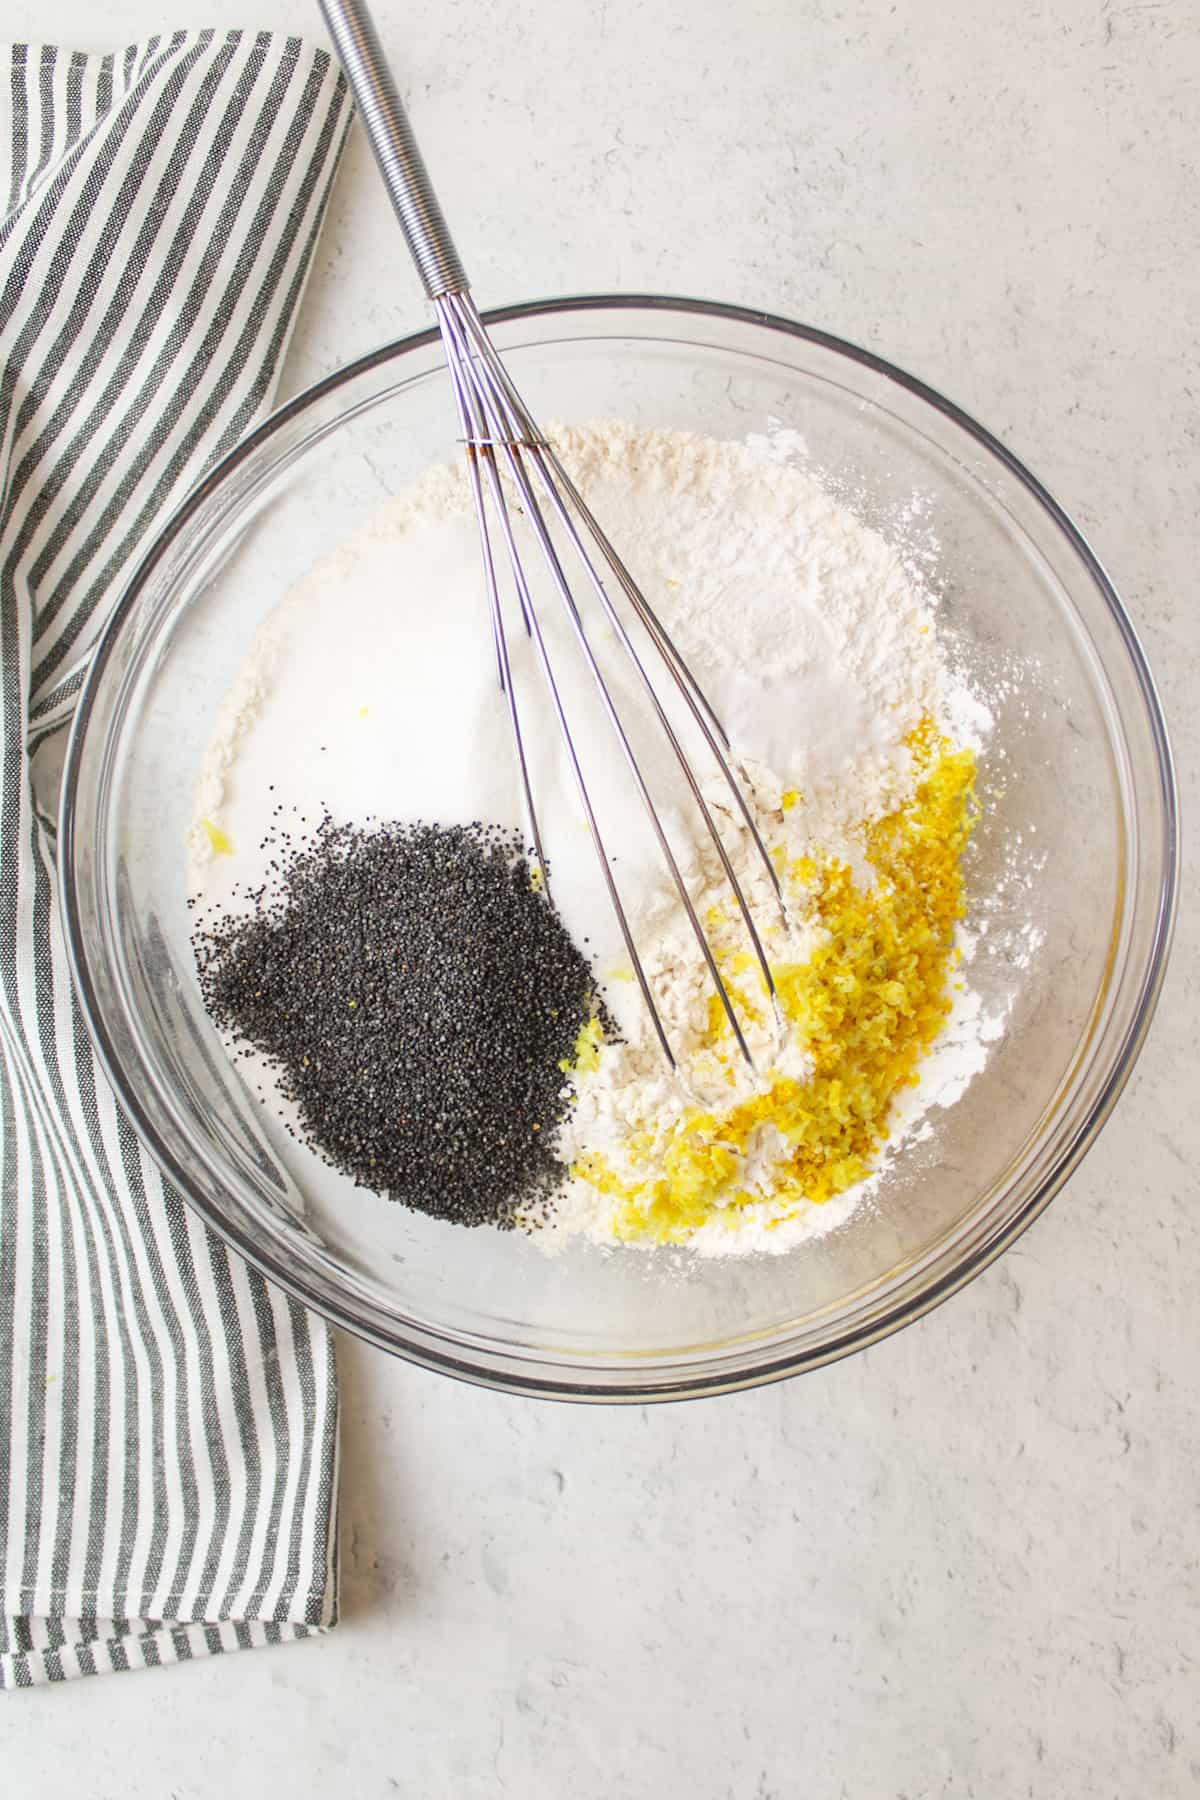 dry ingredients in a mixing bowl with a whisk